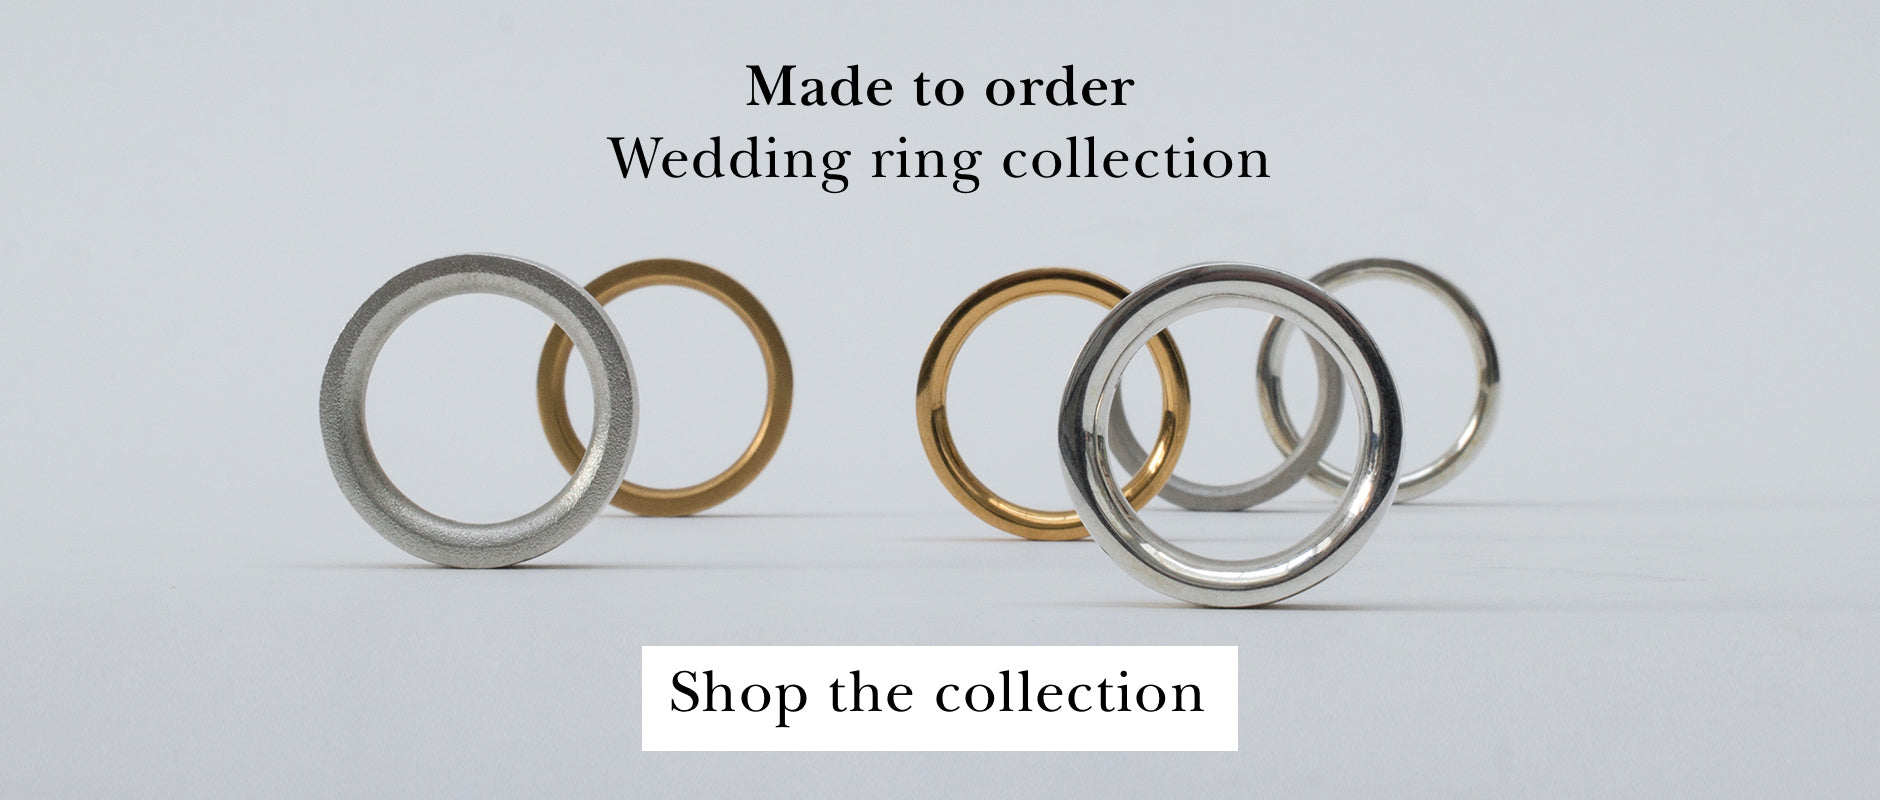 Made to order wedding rings | Alice Made This